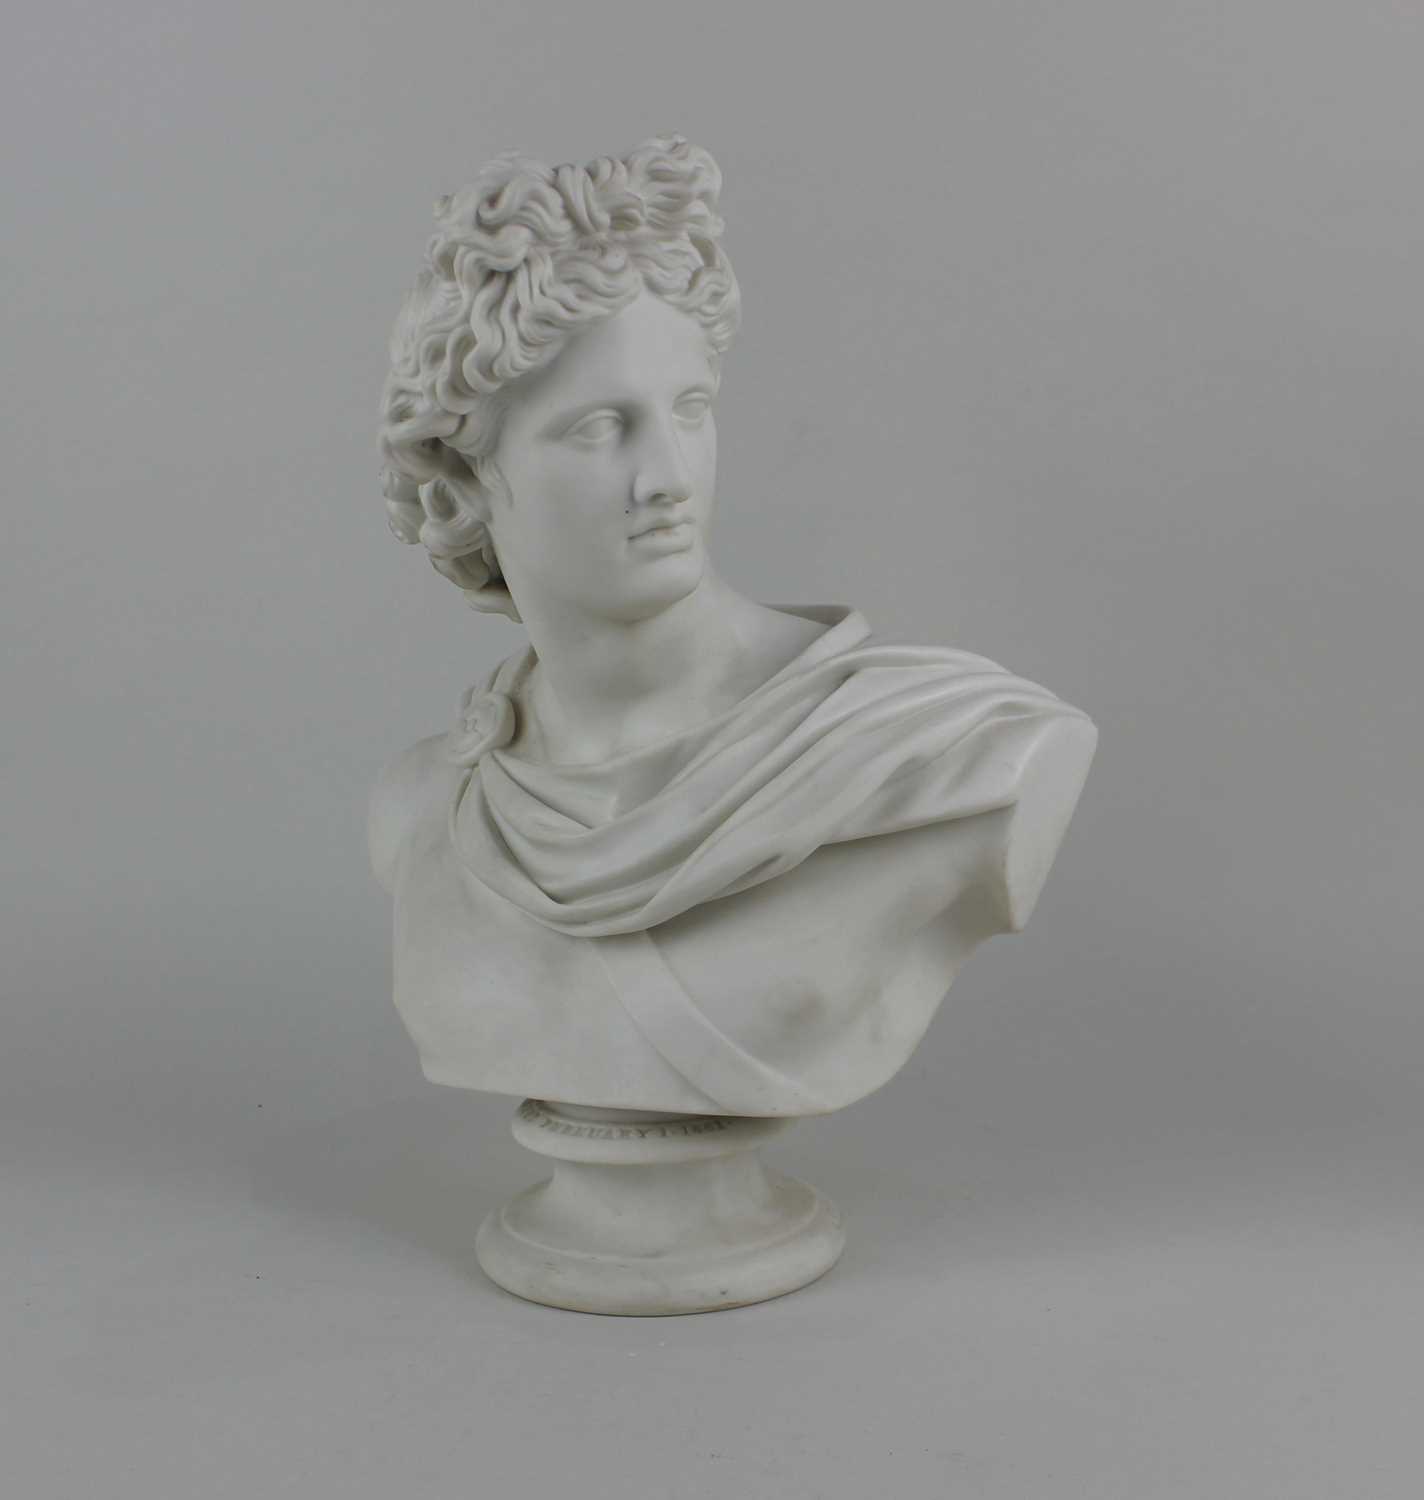 A 19th century Art Union Of London Parian ware bust of Apollo modelled by C. Delpech after the